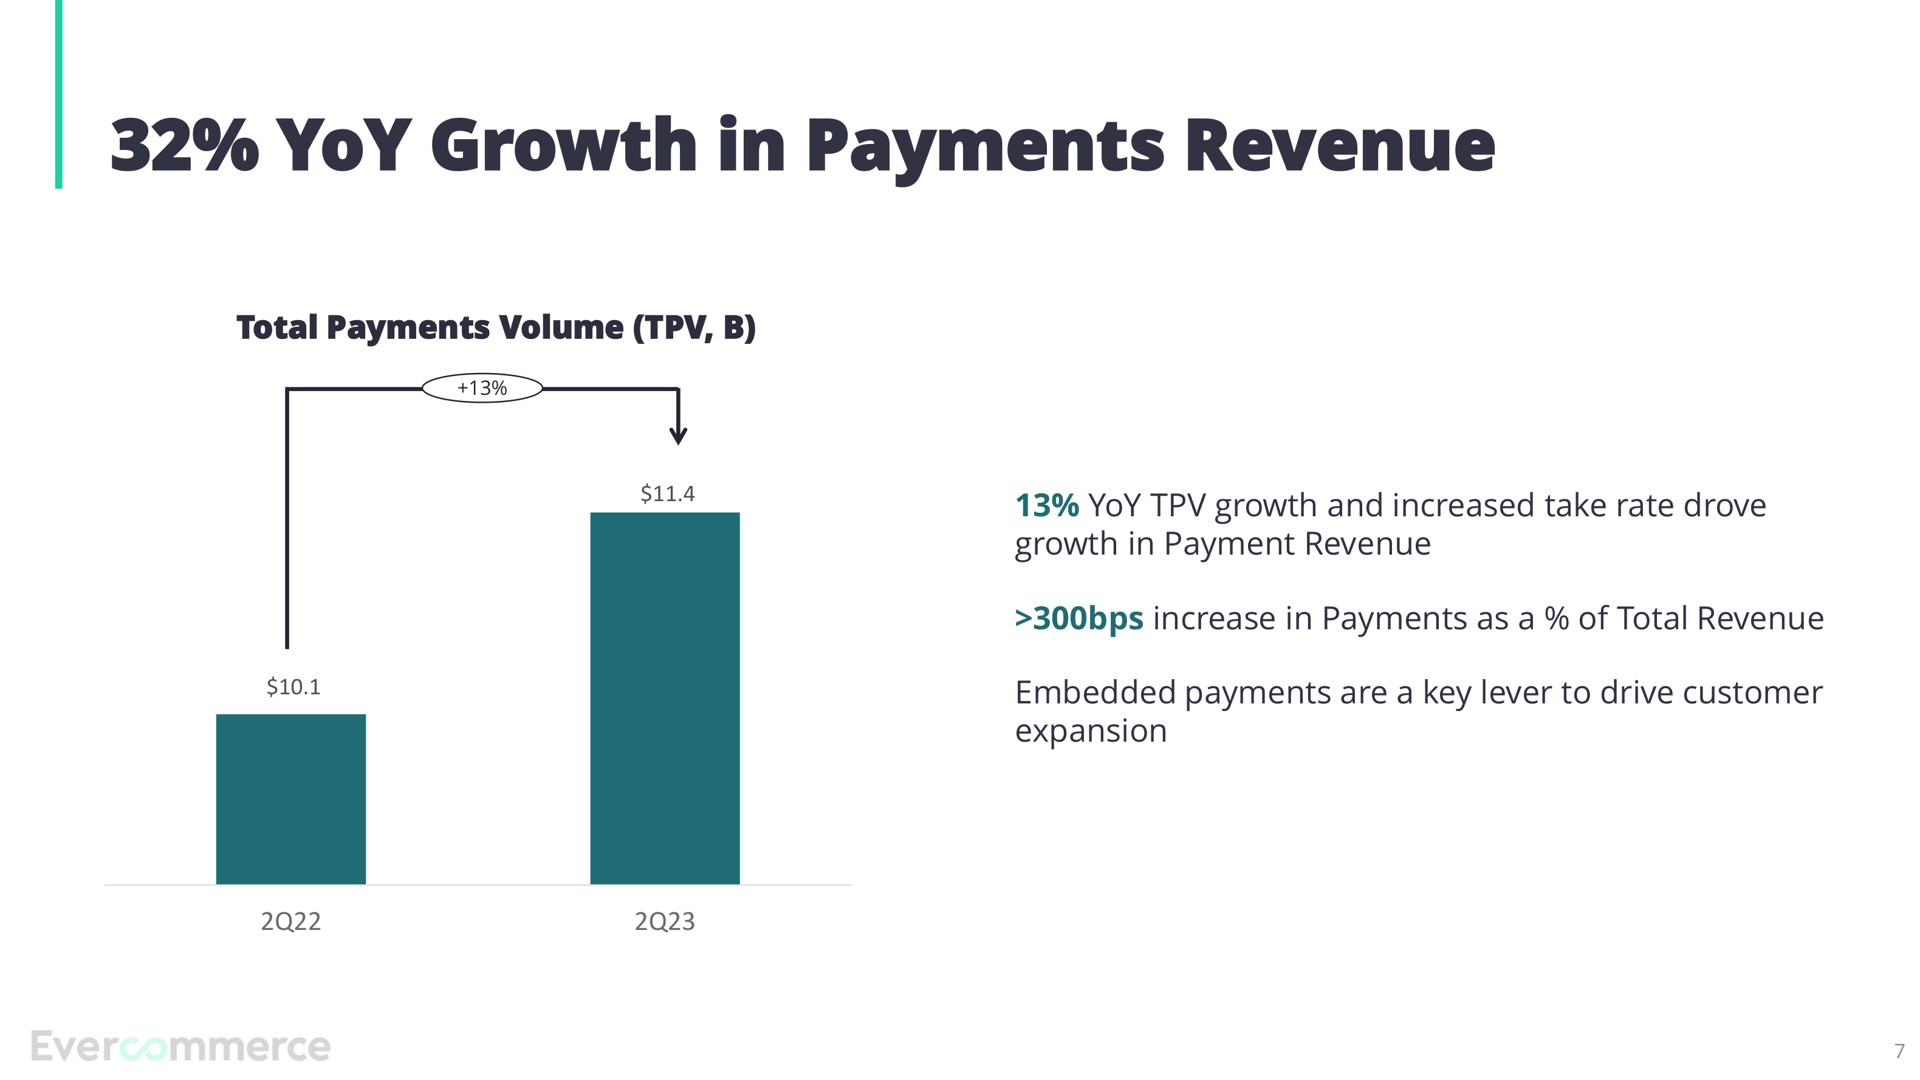 yoy growth in payments revenue | EverCommerce